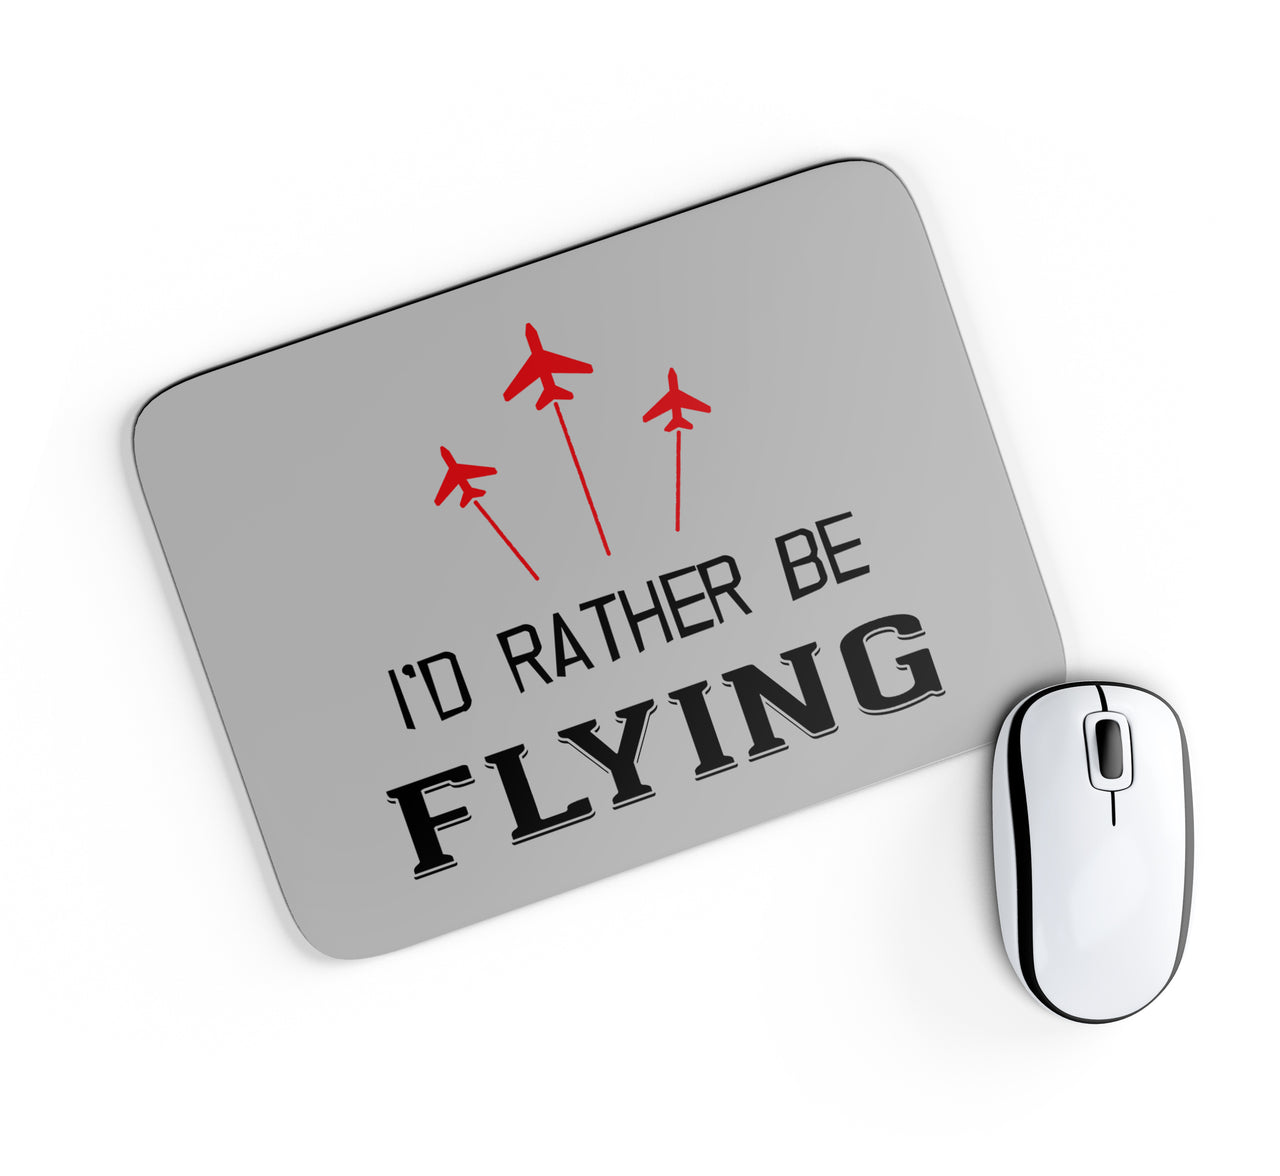 I'D Rather Be Flying Designed Mouse Pads